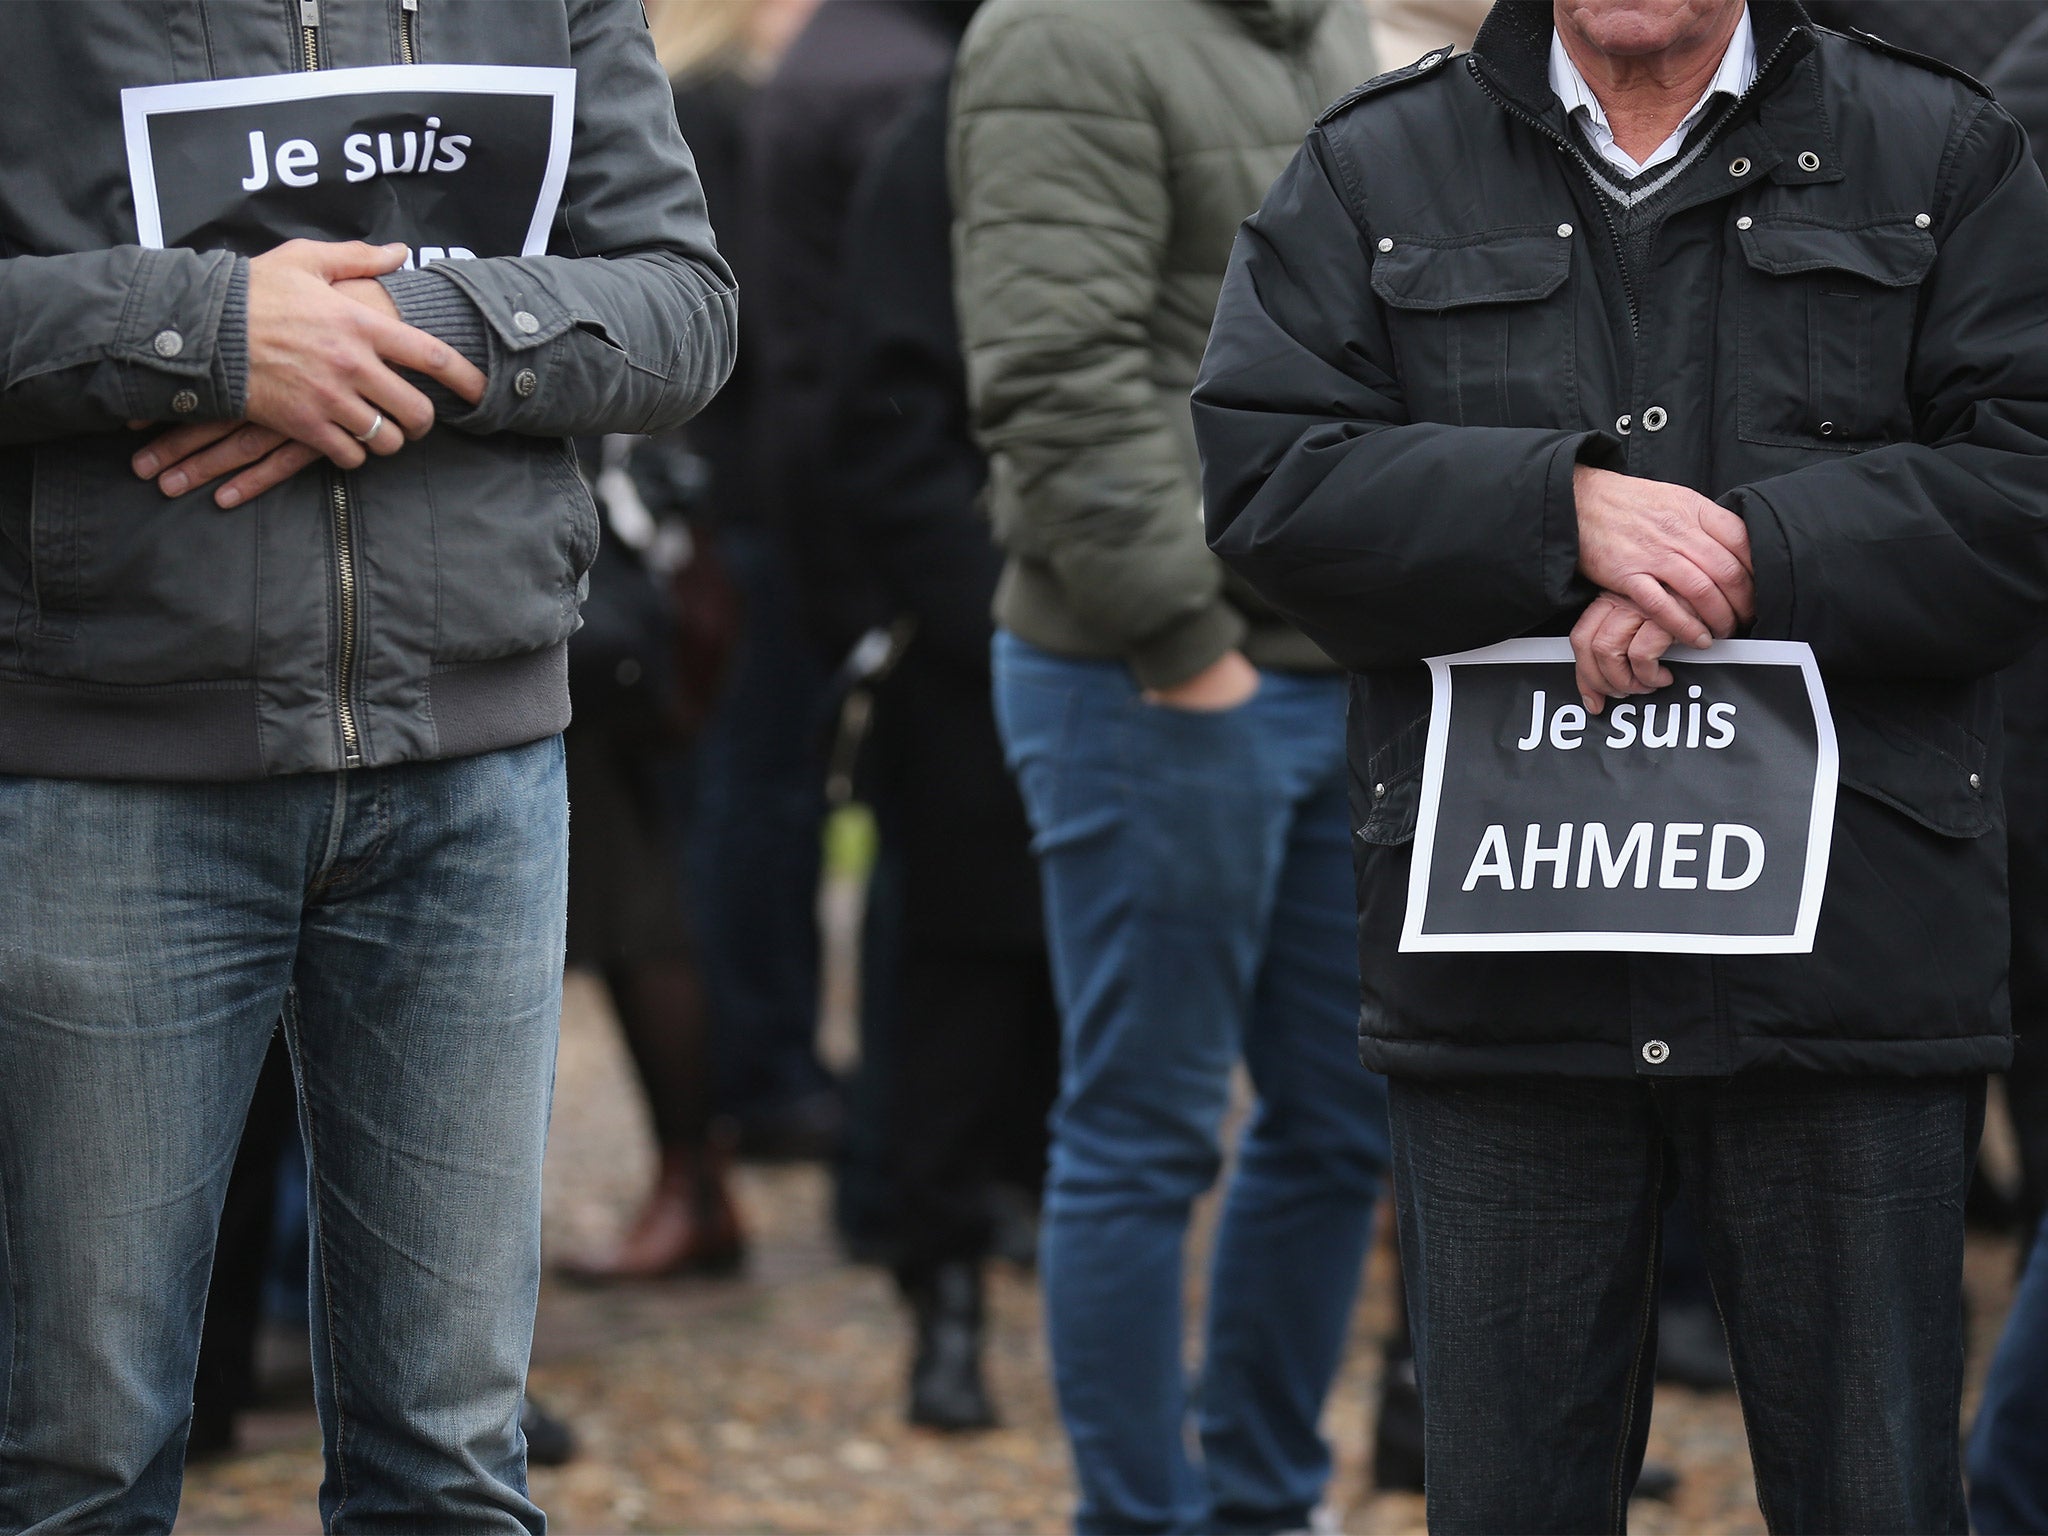 Mourners hold signs saying 'Je suis Ahmed' (I am Ahmed) during the funeral of murdered police officer Ahmed Merabet, in Bobigny, France